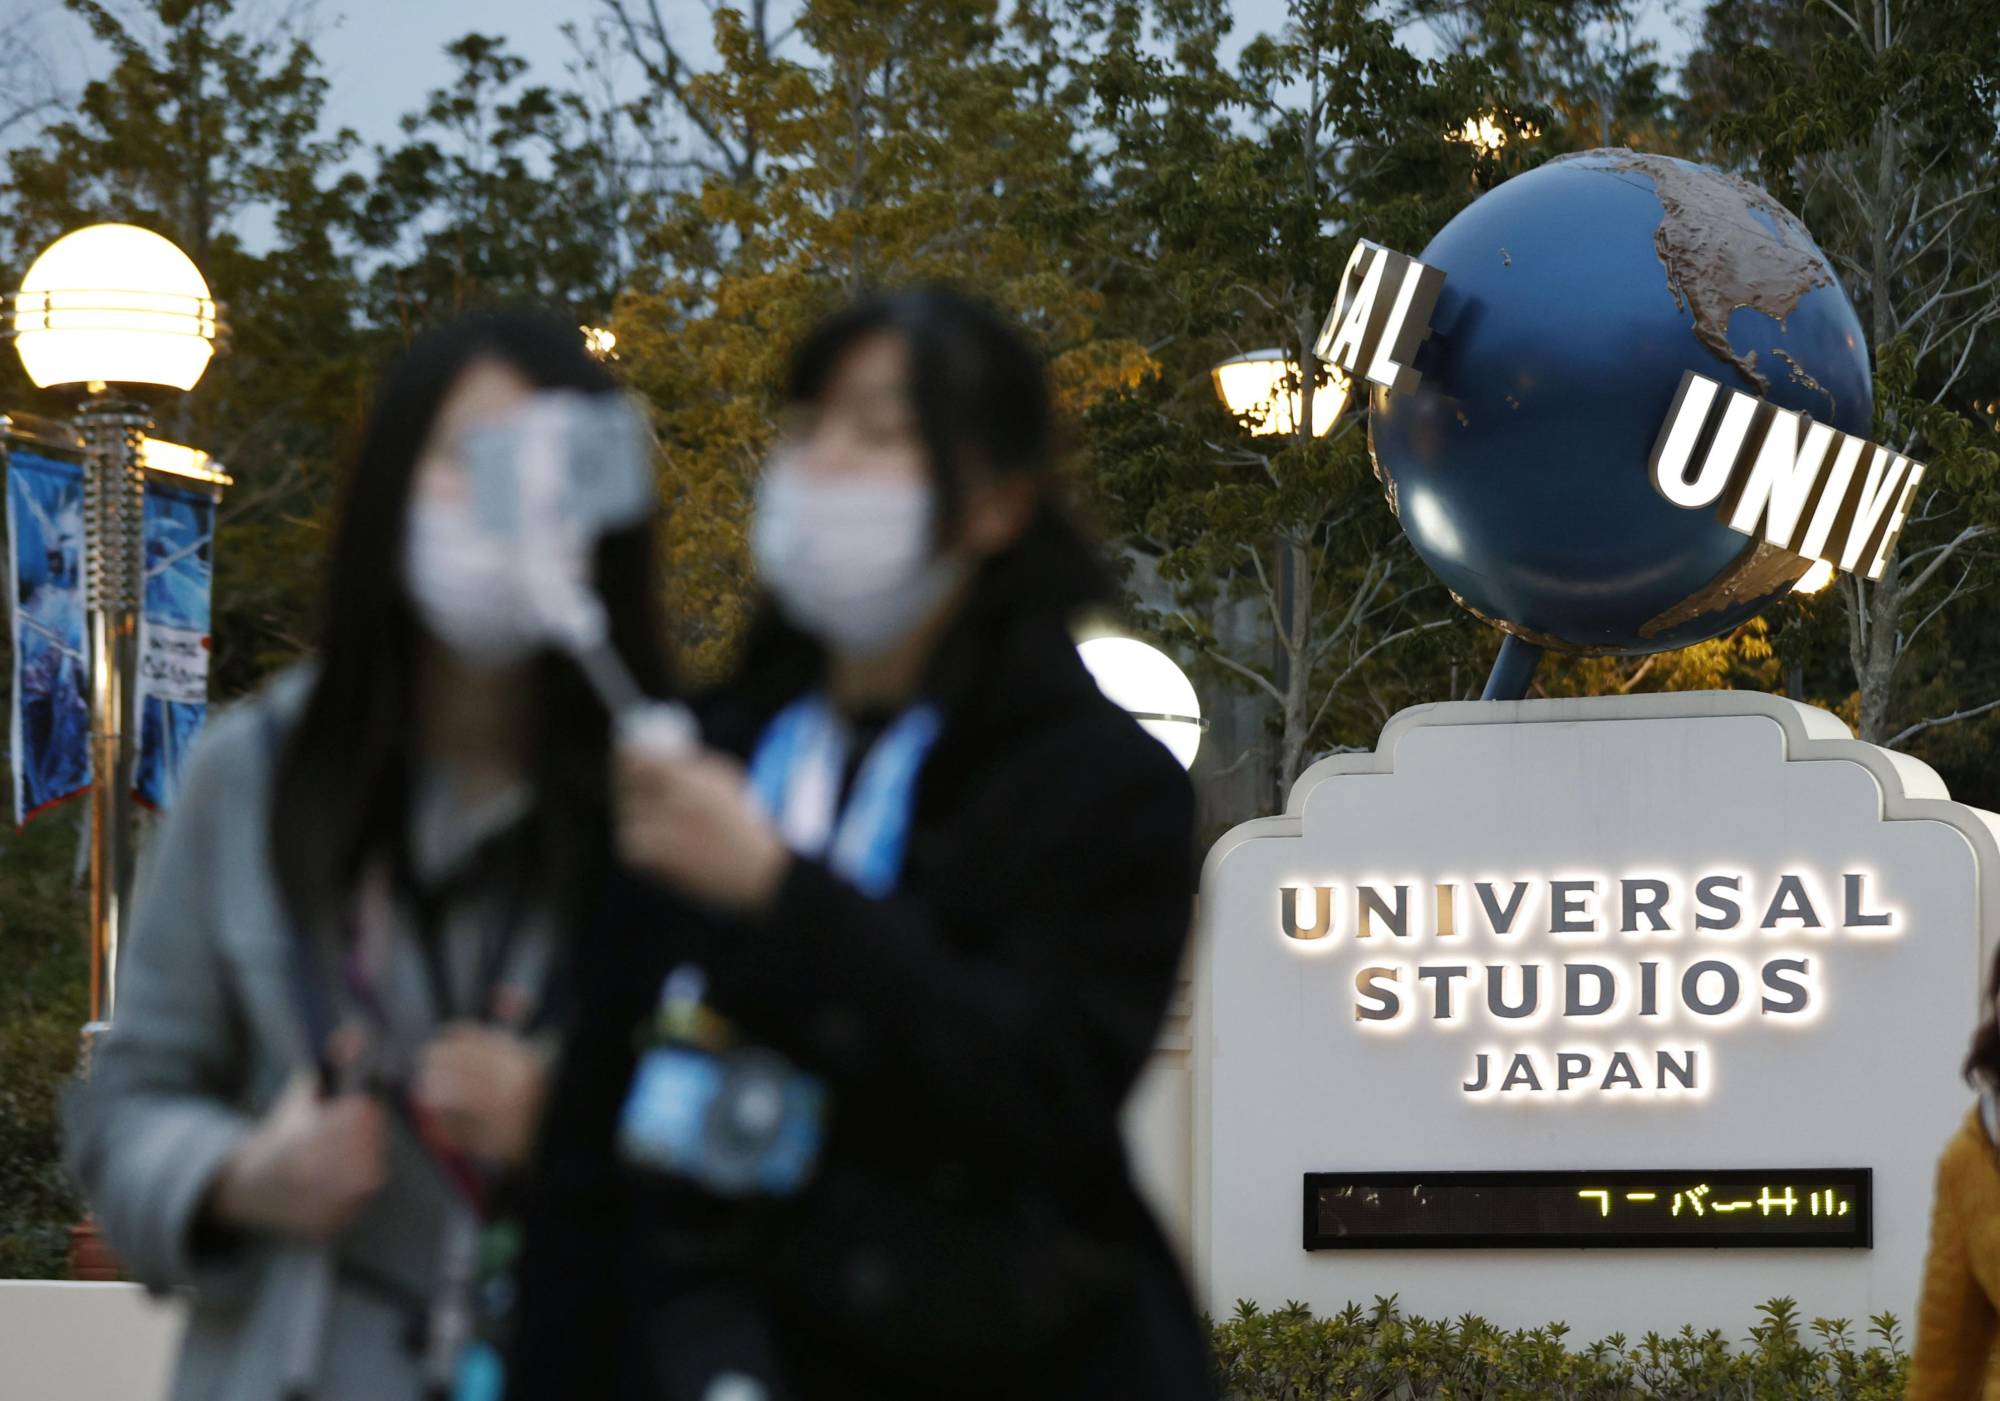 People visit Universal Studios Japan in Osaka on Feb. 28, a day before it was closed to help curb the spread of COVID-19 infections. | KYODO